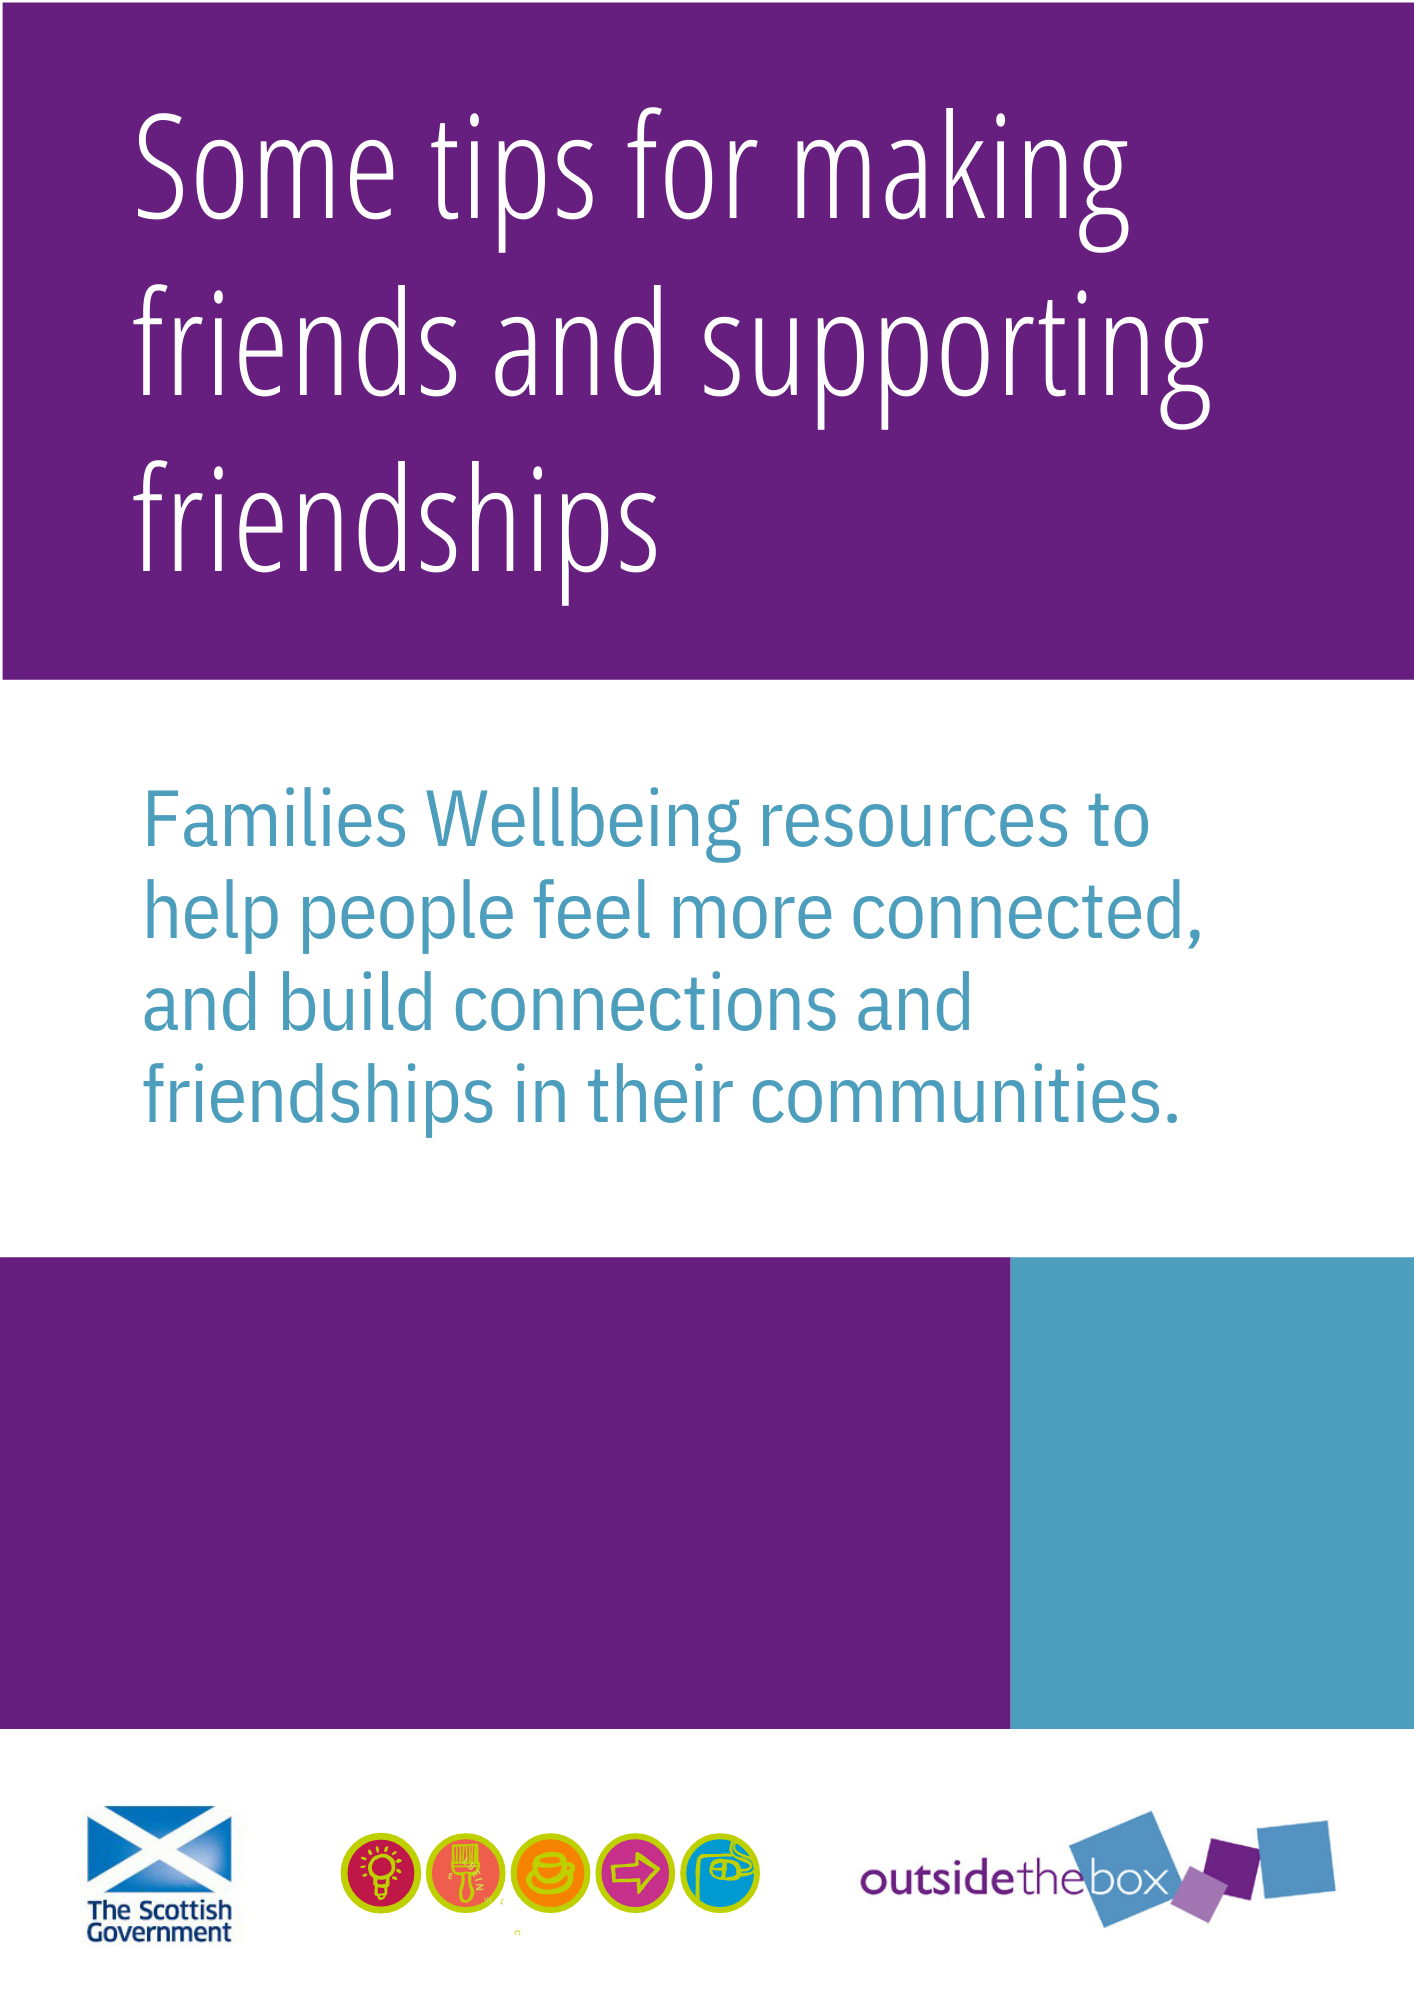 Tips for making friends and supporting friendships. Families Wellbeing resources to help people feel more connected, and build connections and friendships in their communities.